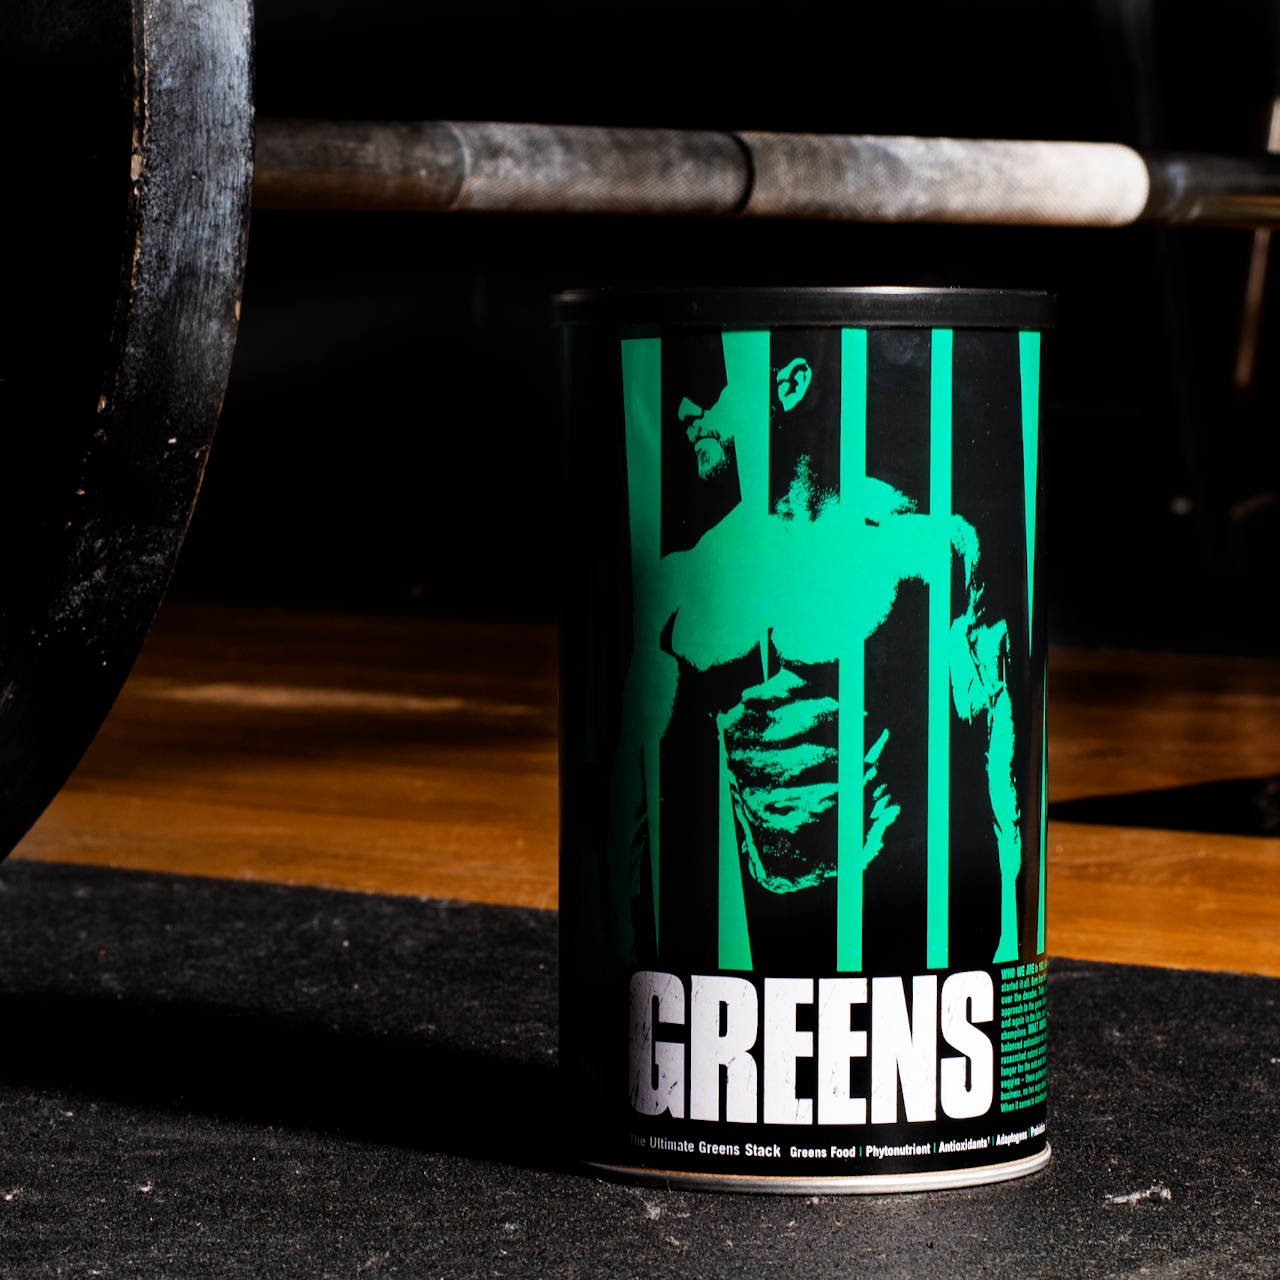 Animal Greens: Greens Superfood Supplement in Pills